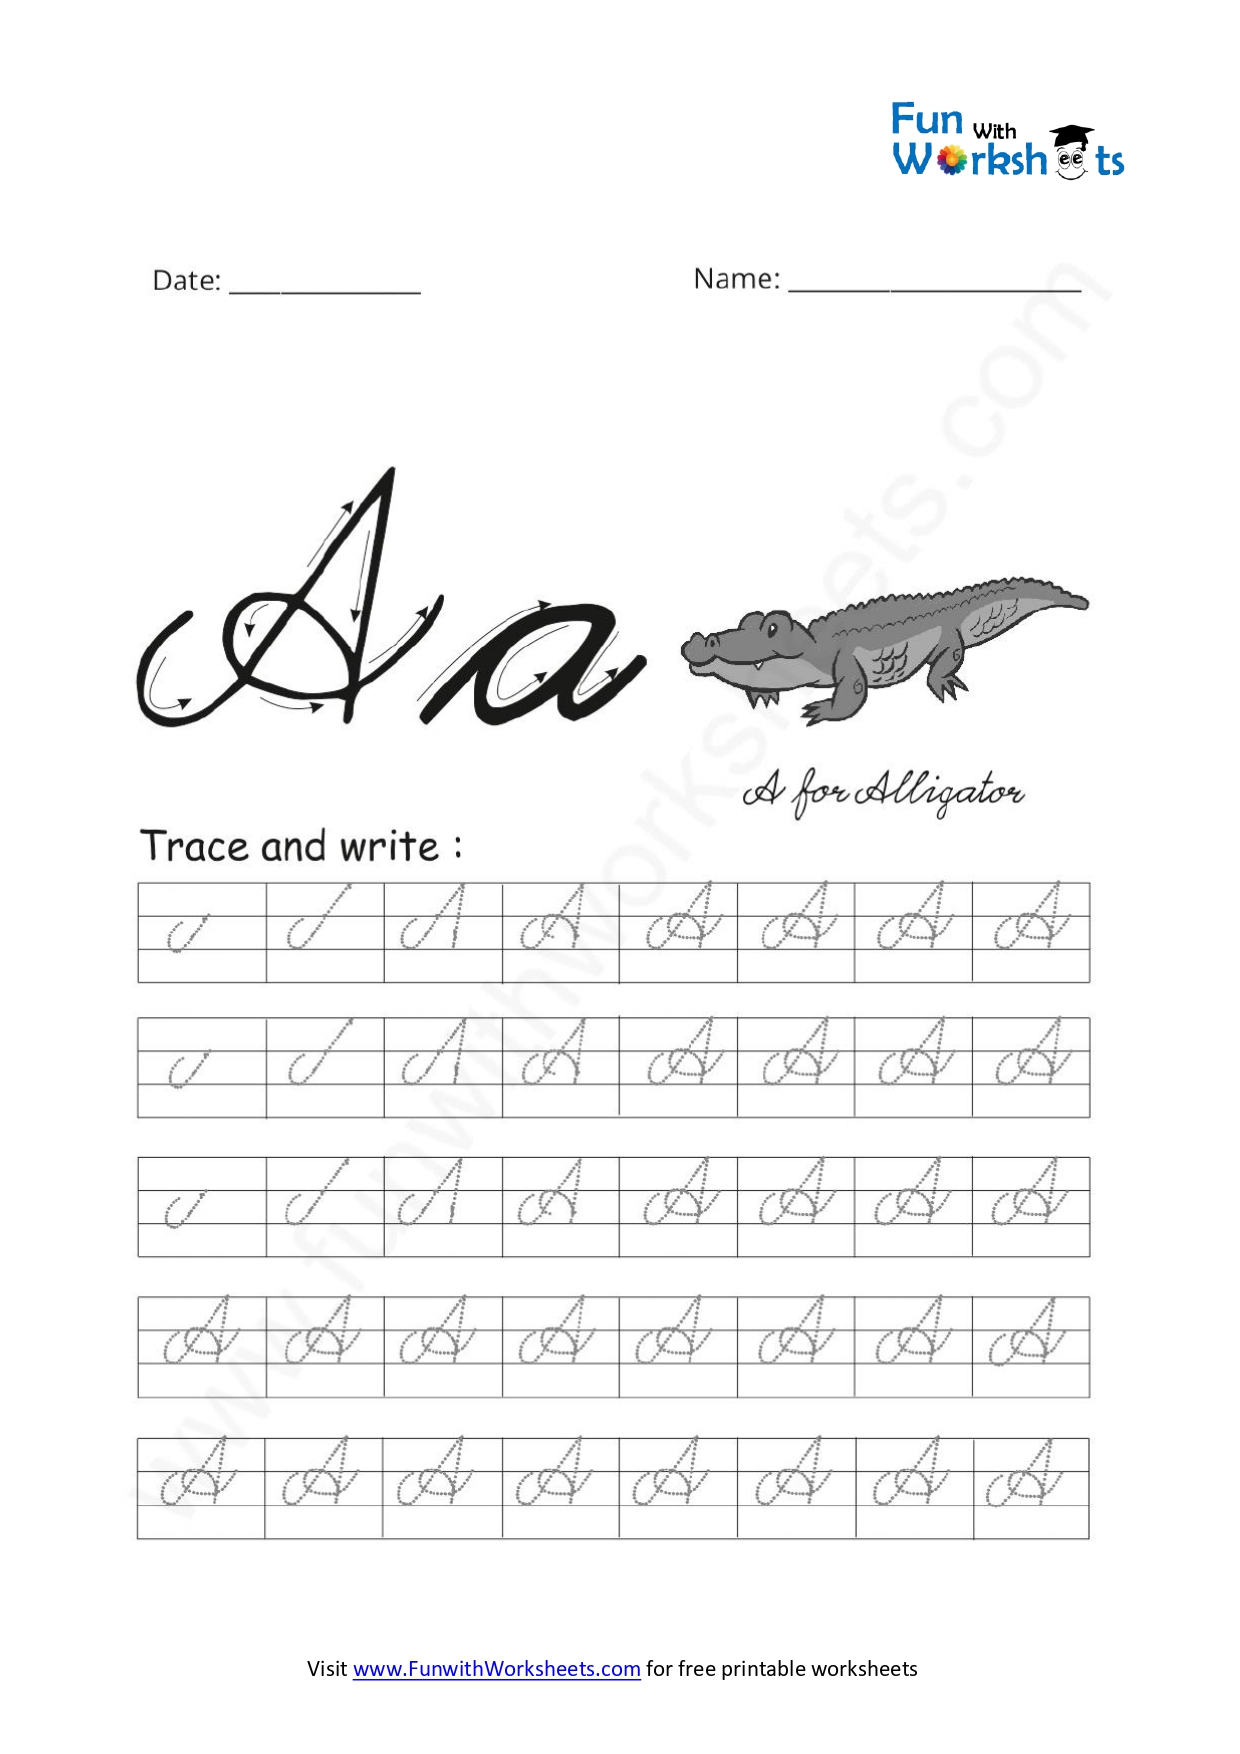 capital-letters-in-cursive-cursive-calligraphy-lowercase-teaching